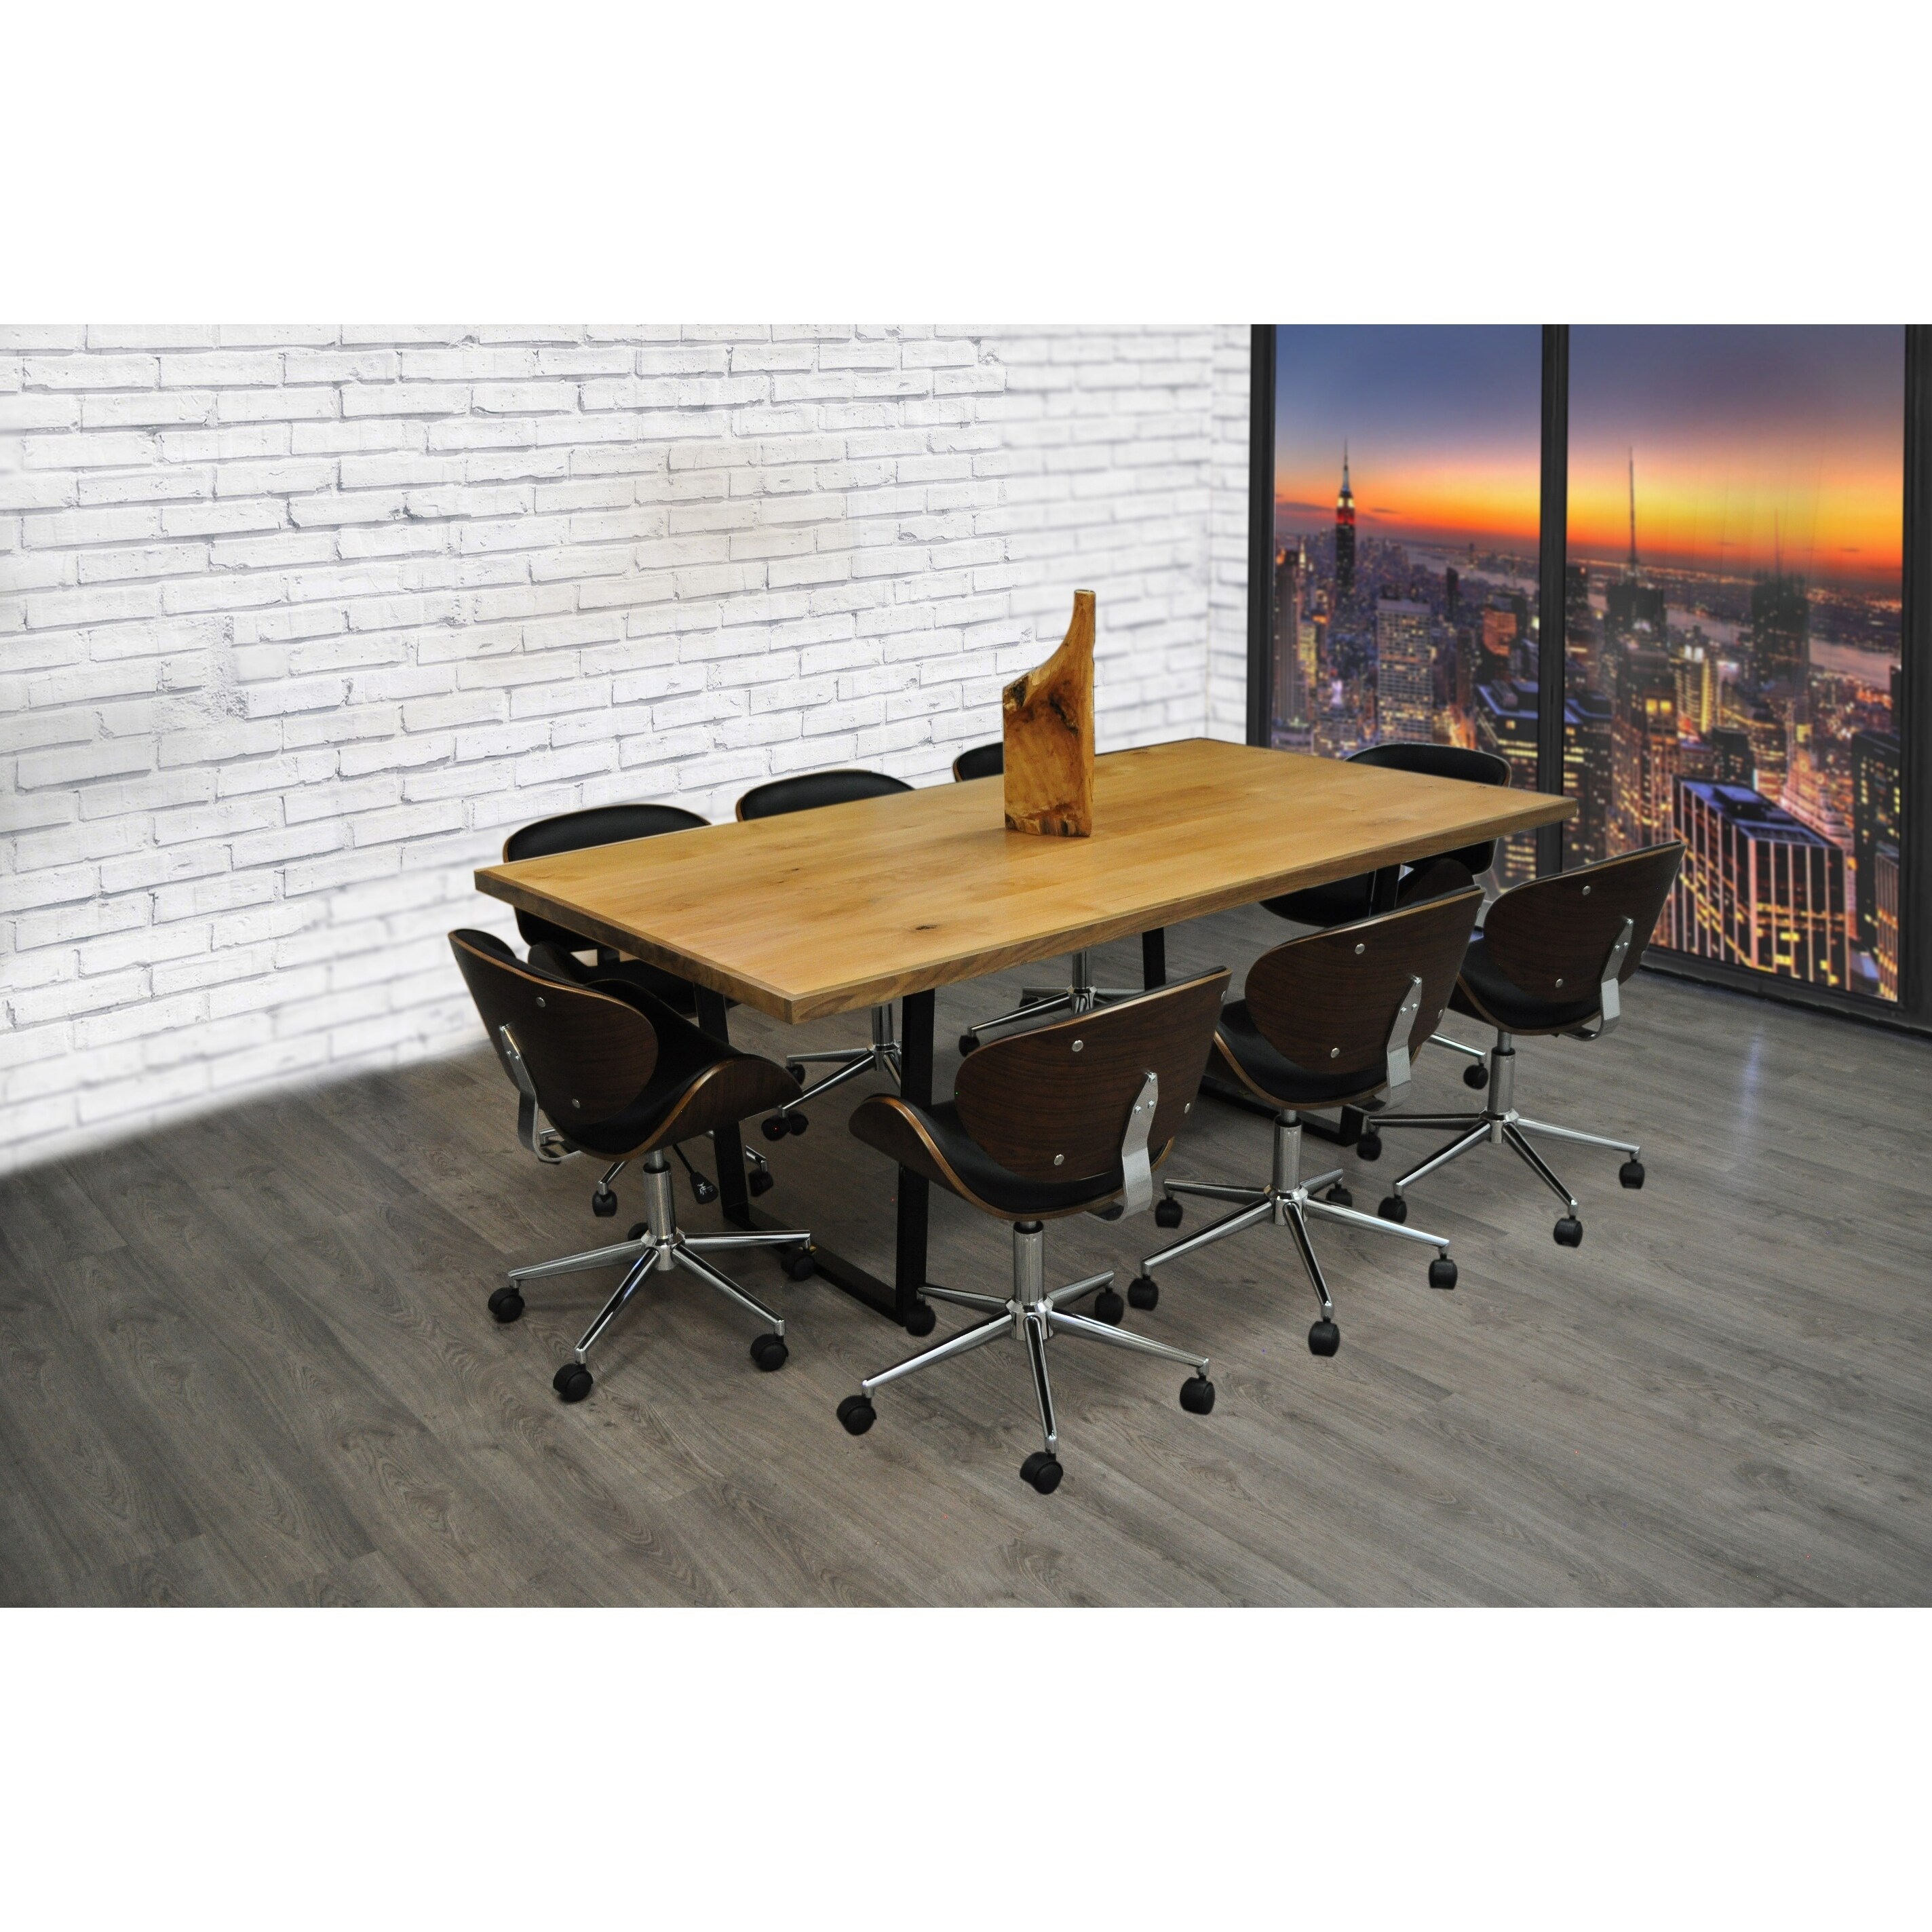 https://ak1.ostkcdn.com/images/products/18087967/SOLIS-Castillo-9-Piece-Solid-Wood-Conference-Table-Set-with-Wood-and-Black-Bonded-Leather-Office-Chairs-11bda8cc-1a7e-4755-ba20-a968776d8e42.jpg